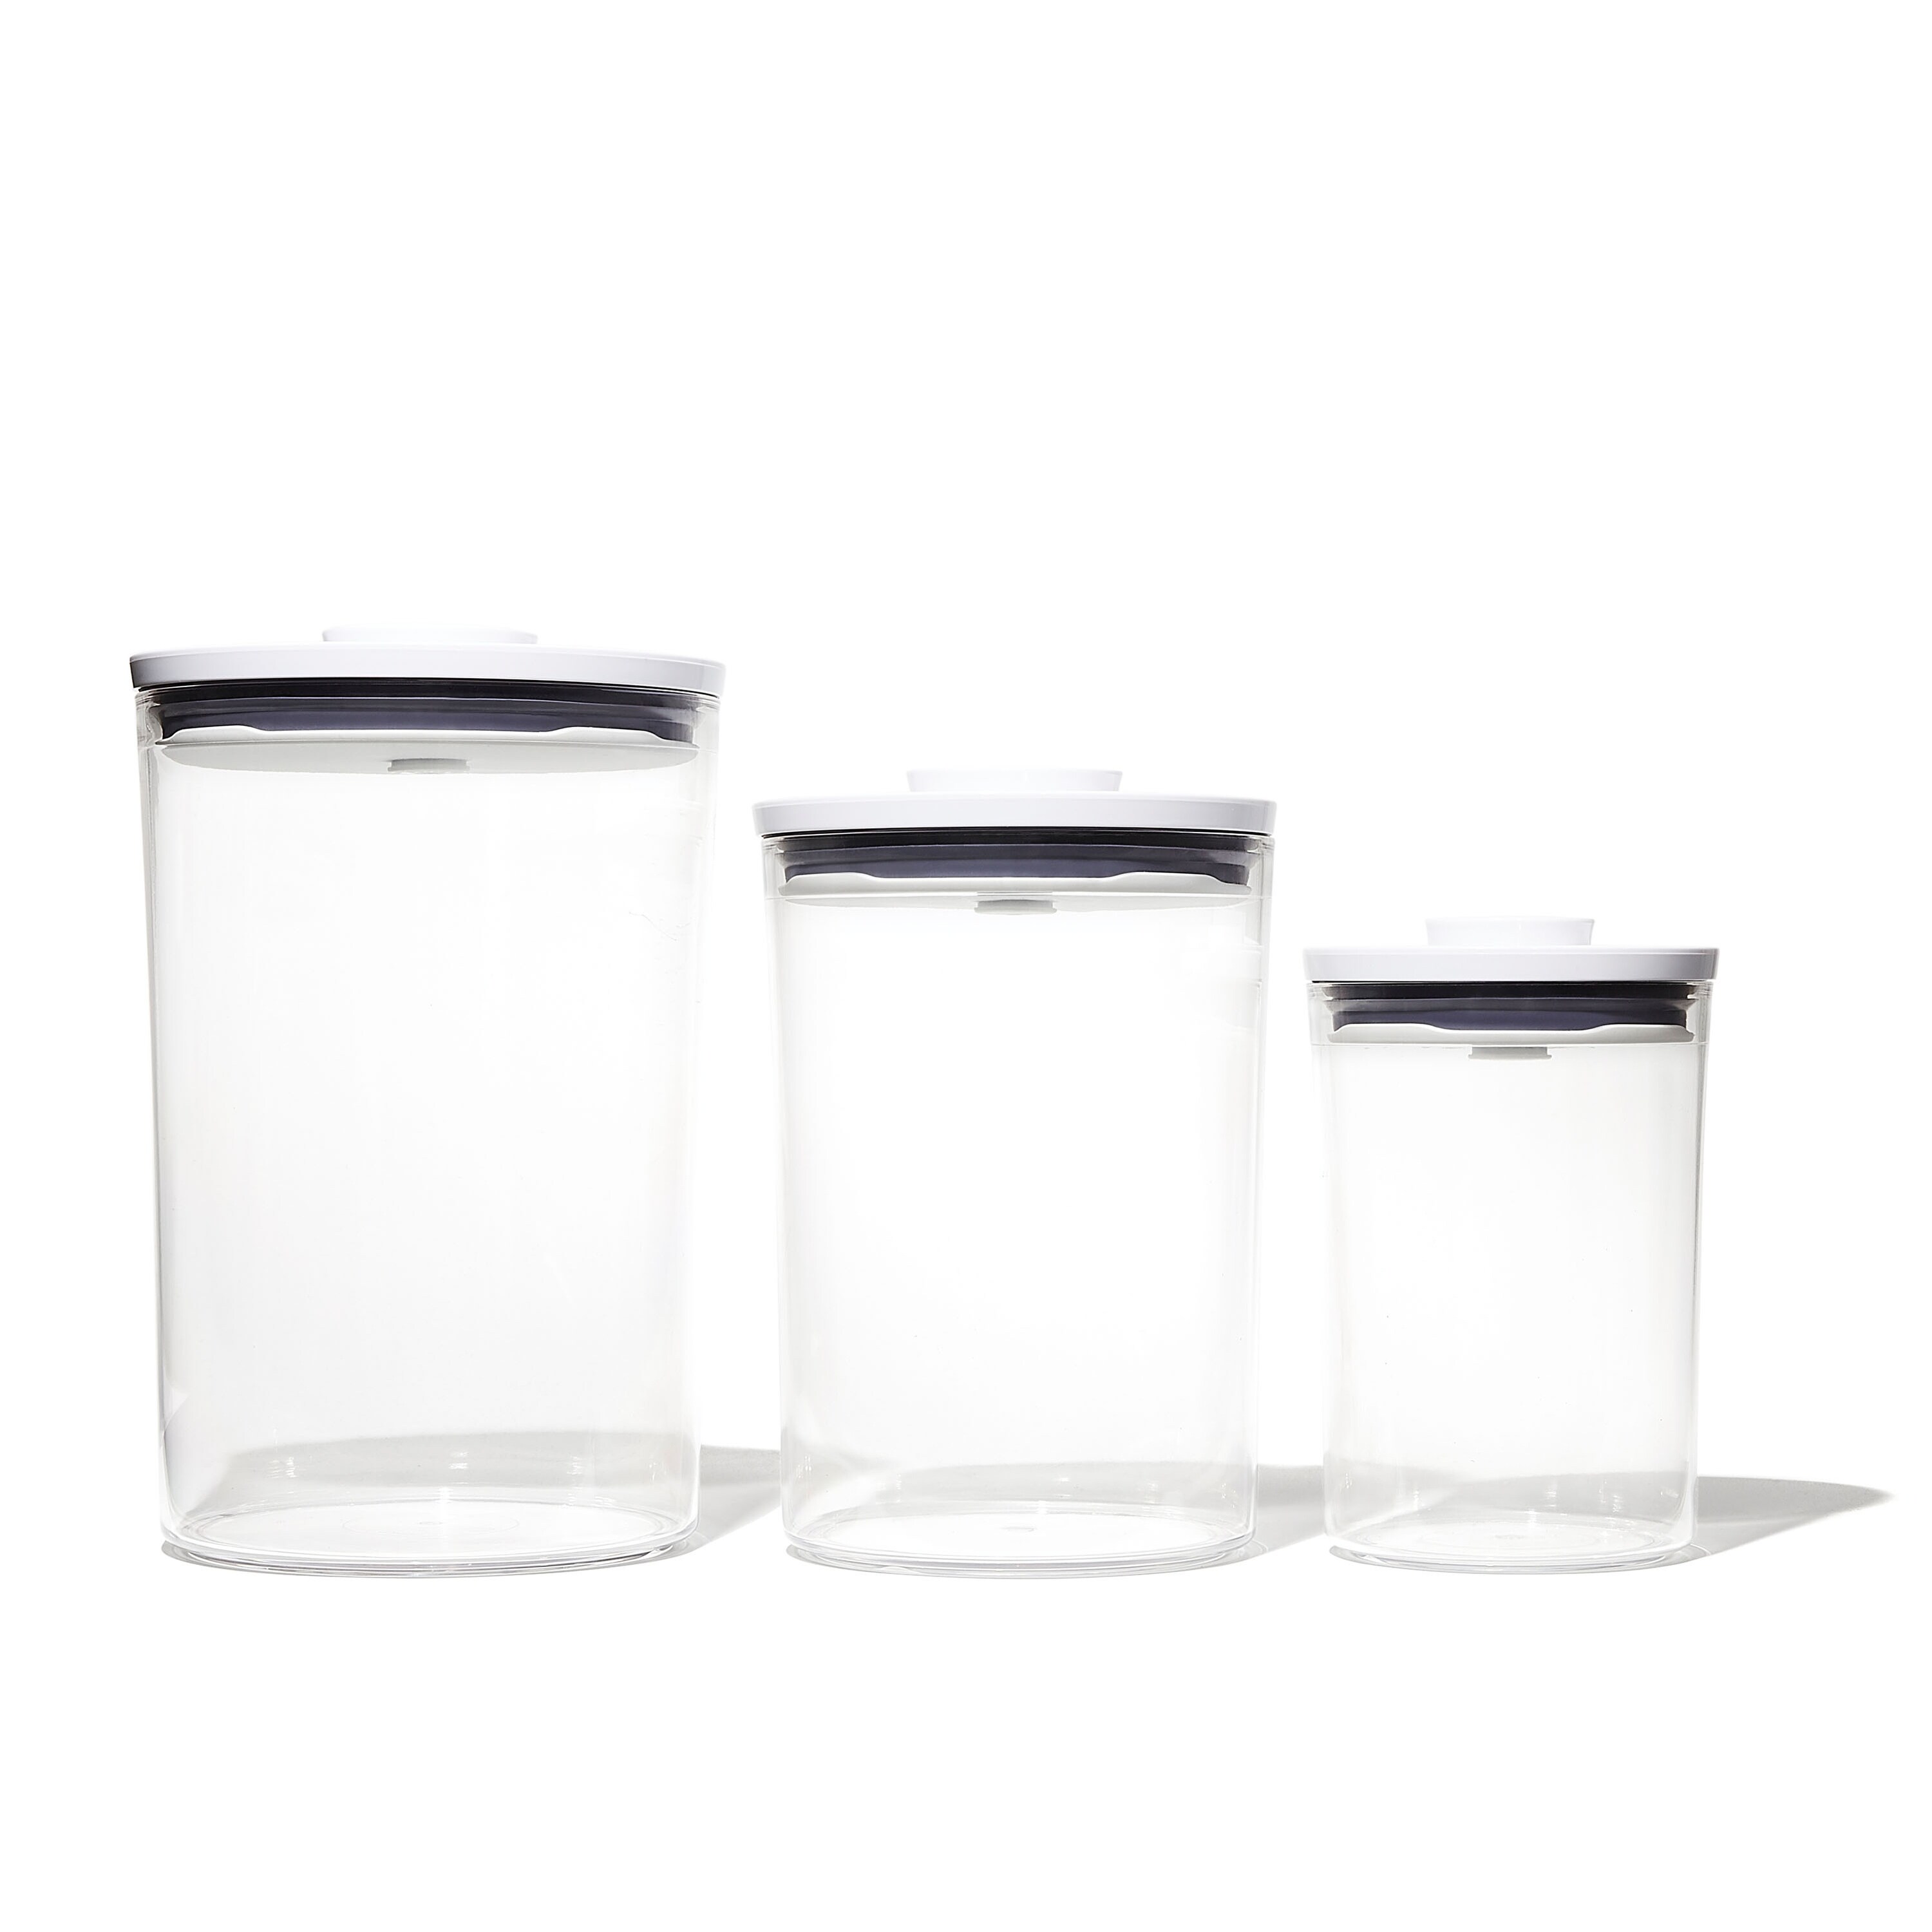 OXO Good Grips 5.2 Qt. Clear Round SAN Plastic Food Storage